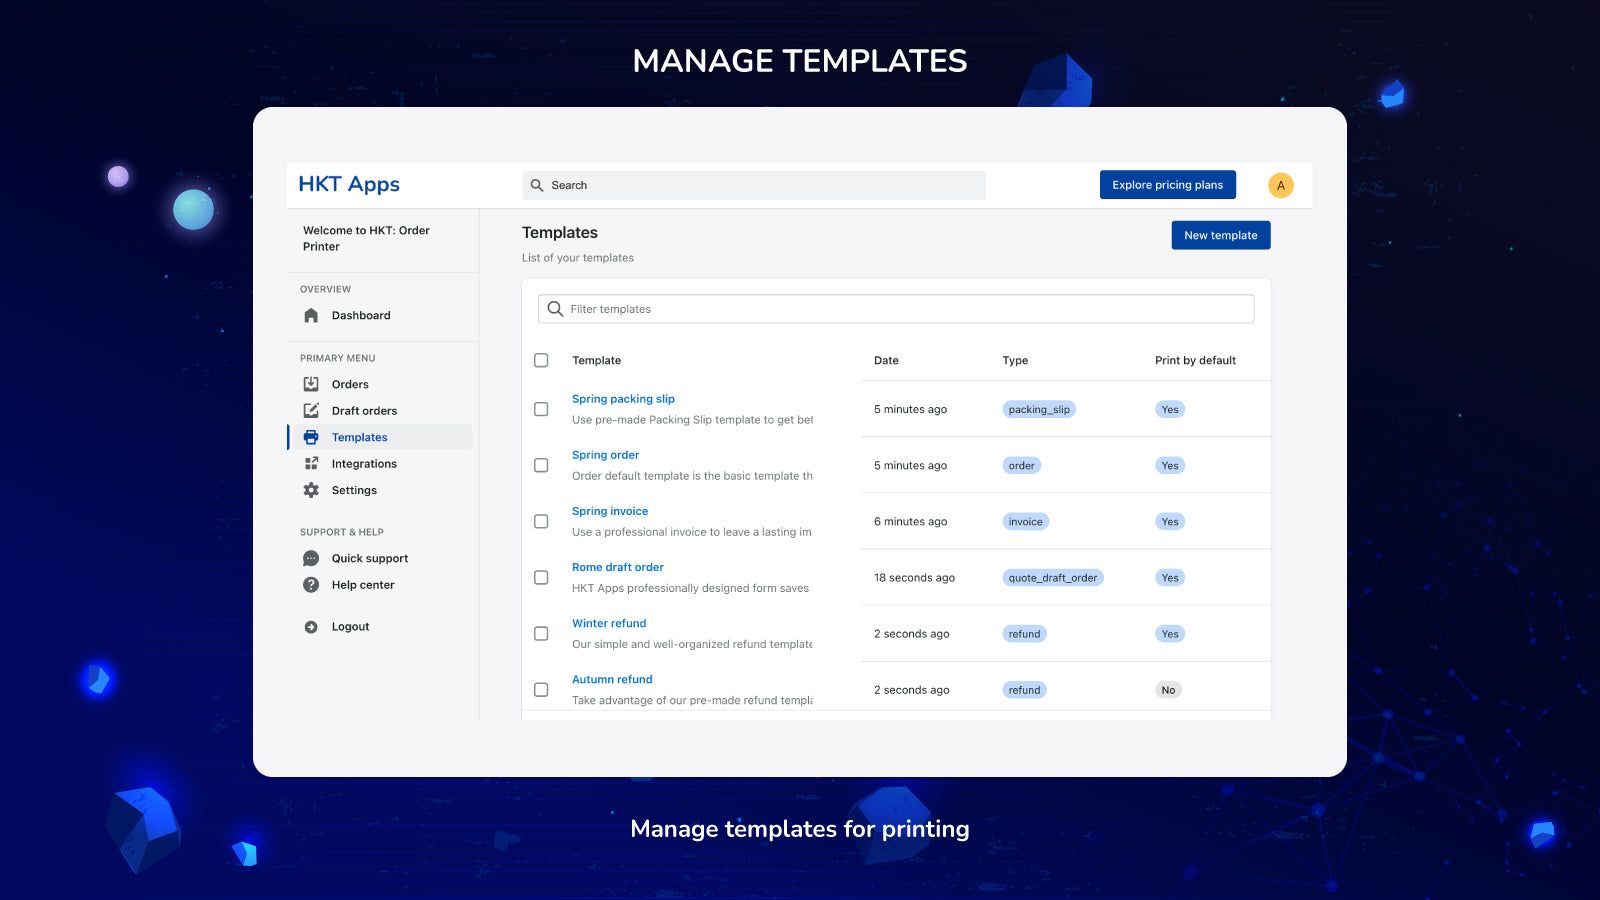 Manage templates for printing